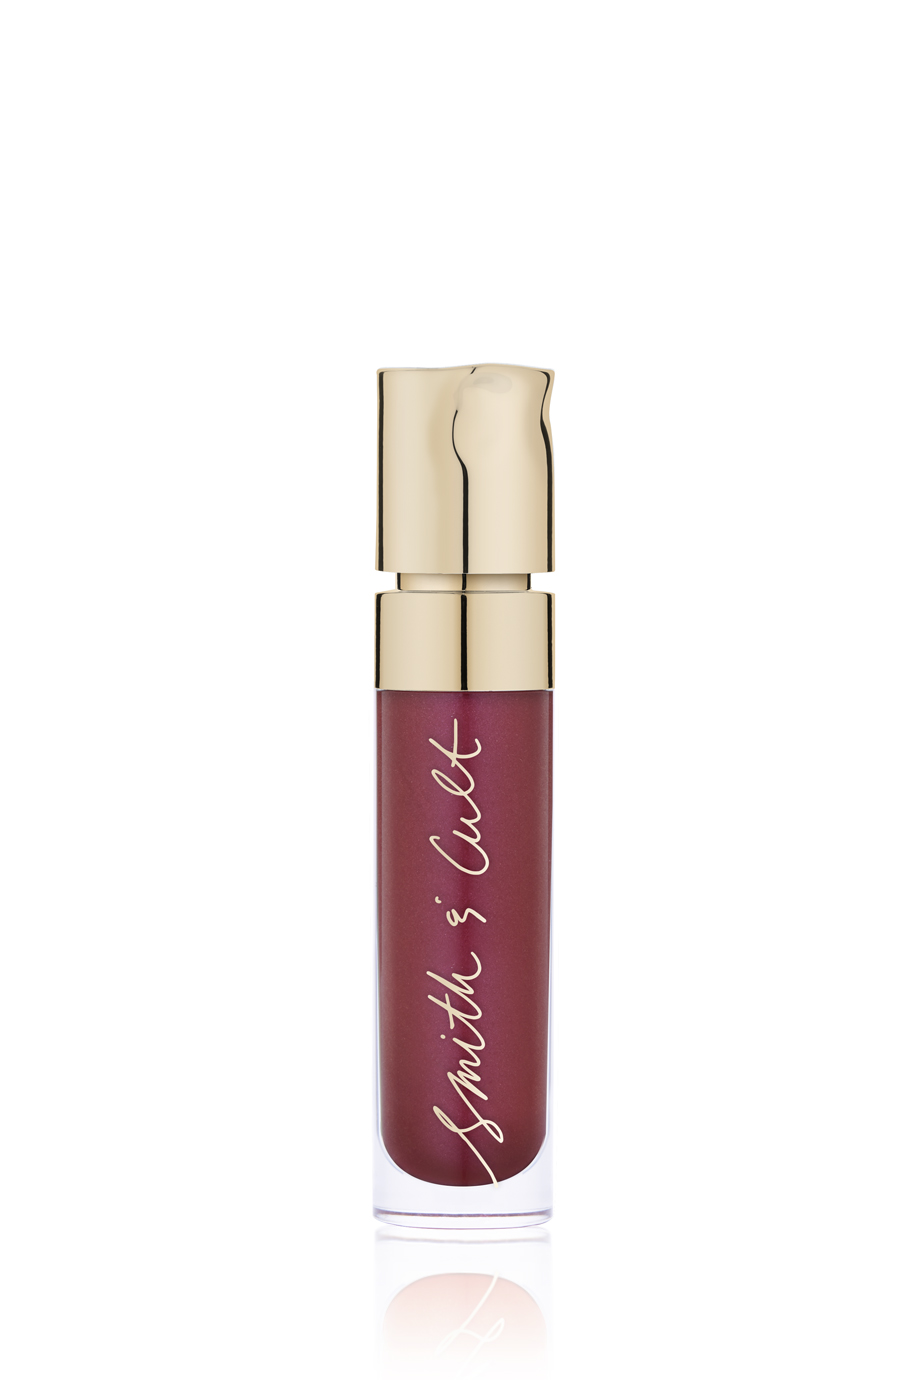 Smith & Cult The Queen Is Dead Lip Lacquer